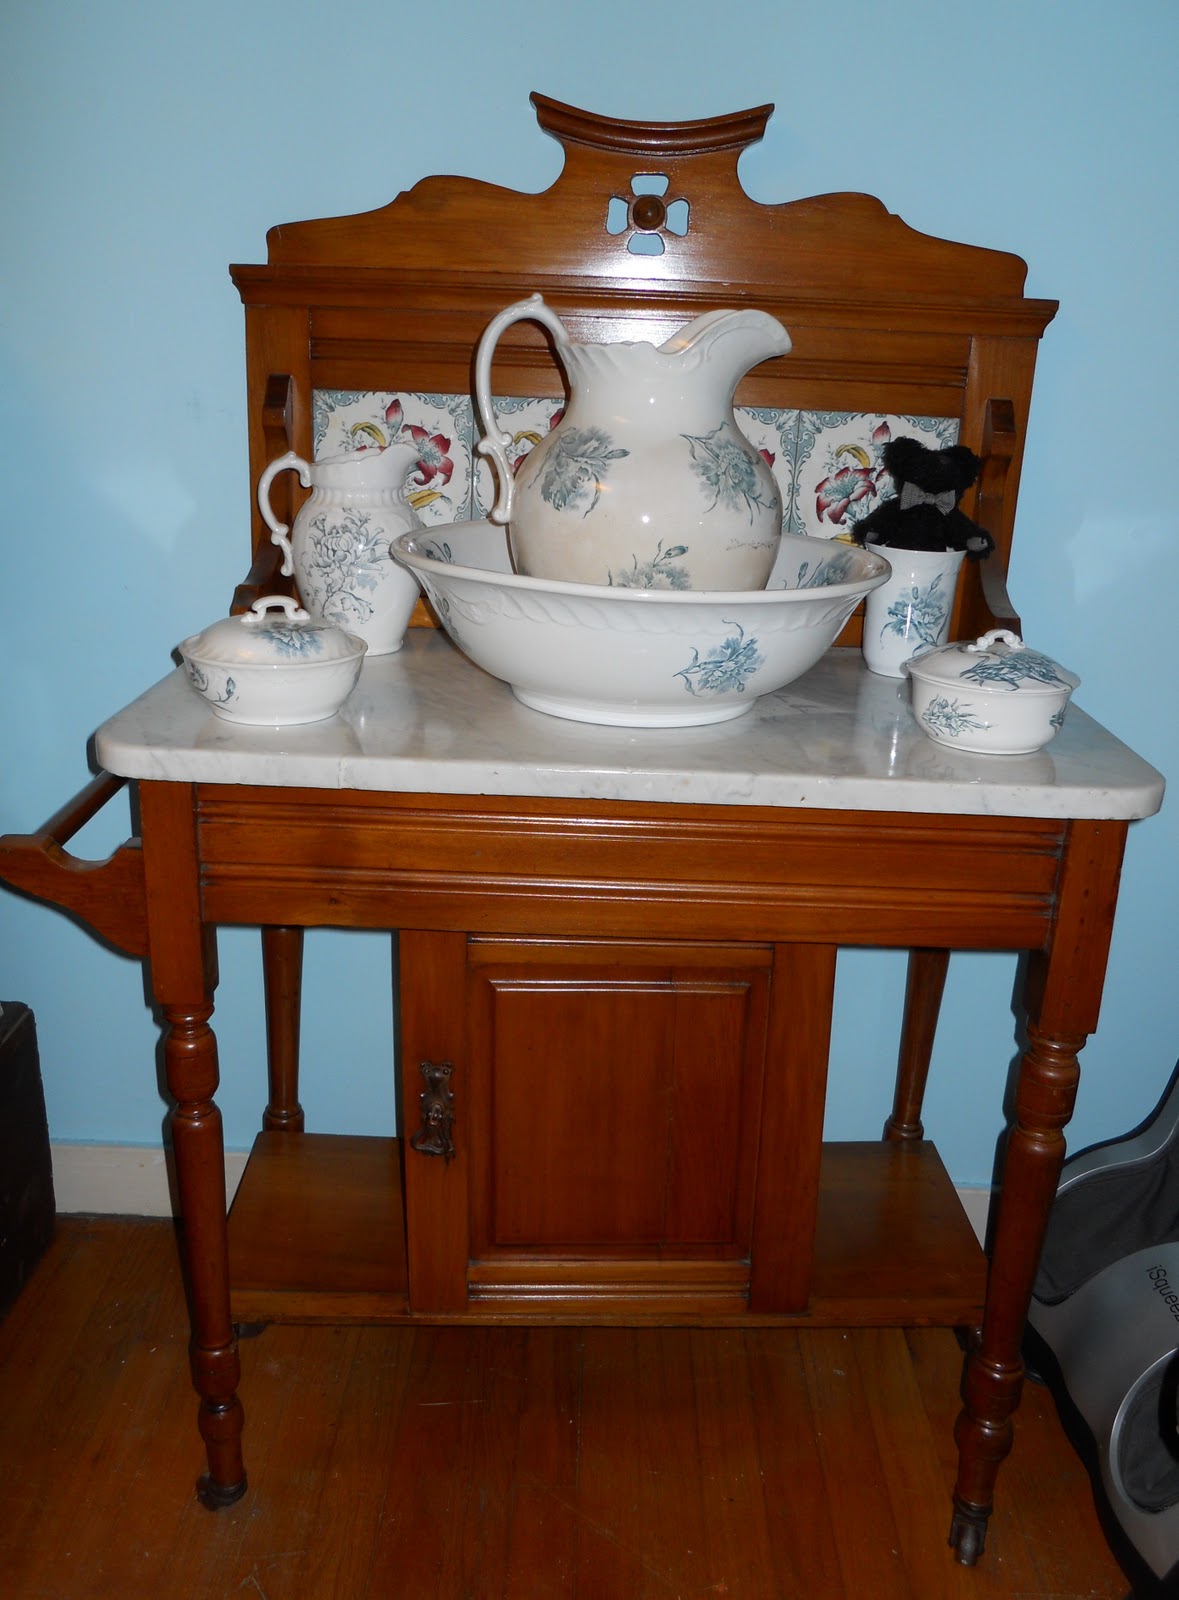 Antiques for Today's Lifestyle: Antique Washstands